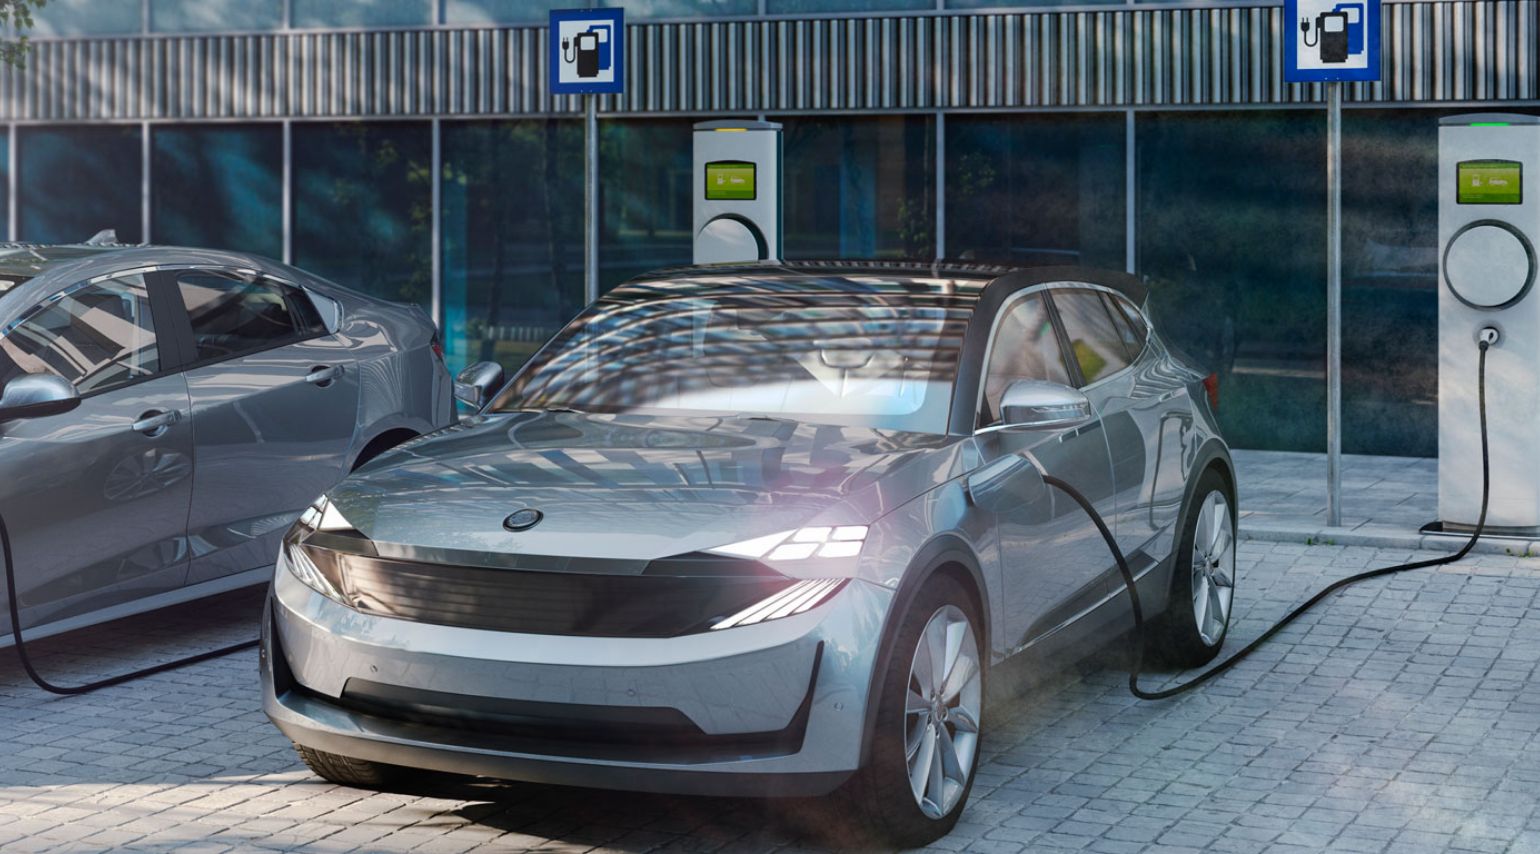 An image of two electric cars.